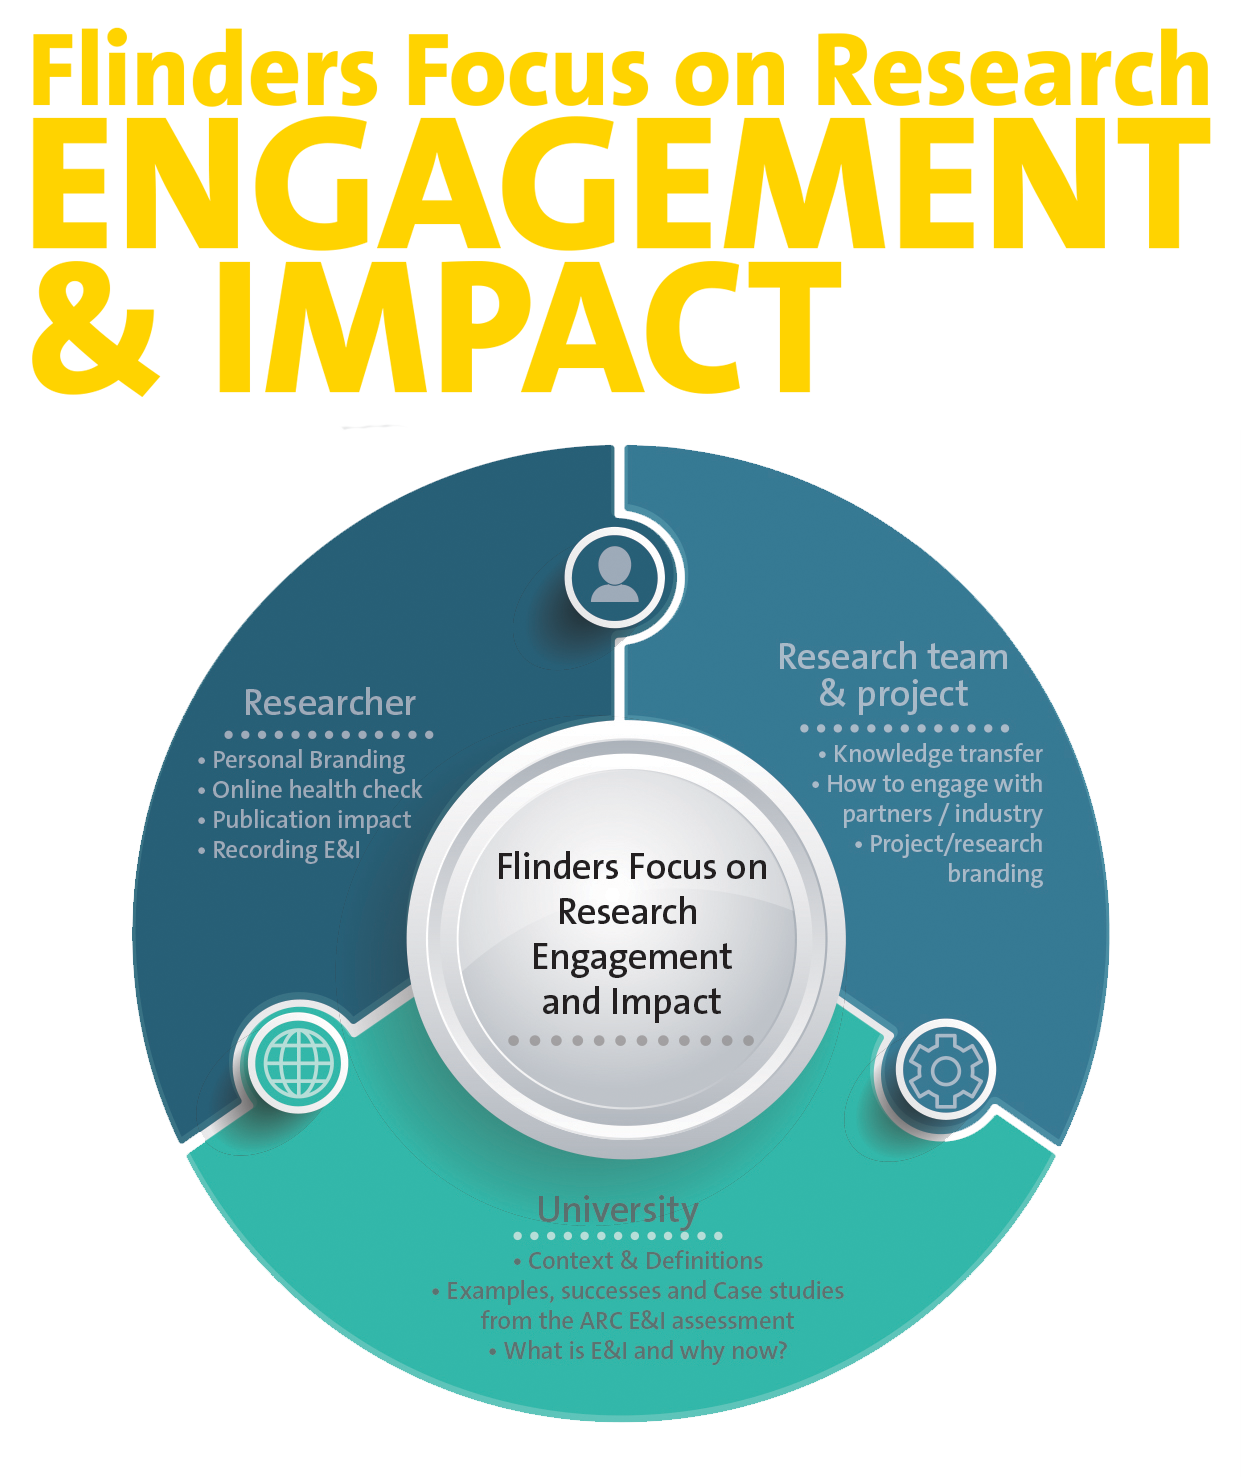 Flinders Focus on Research Engagement and Impact